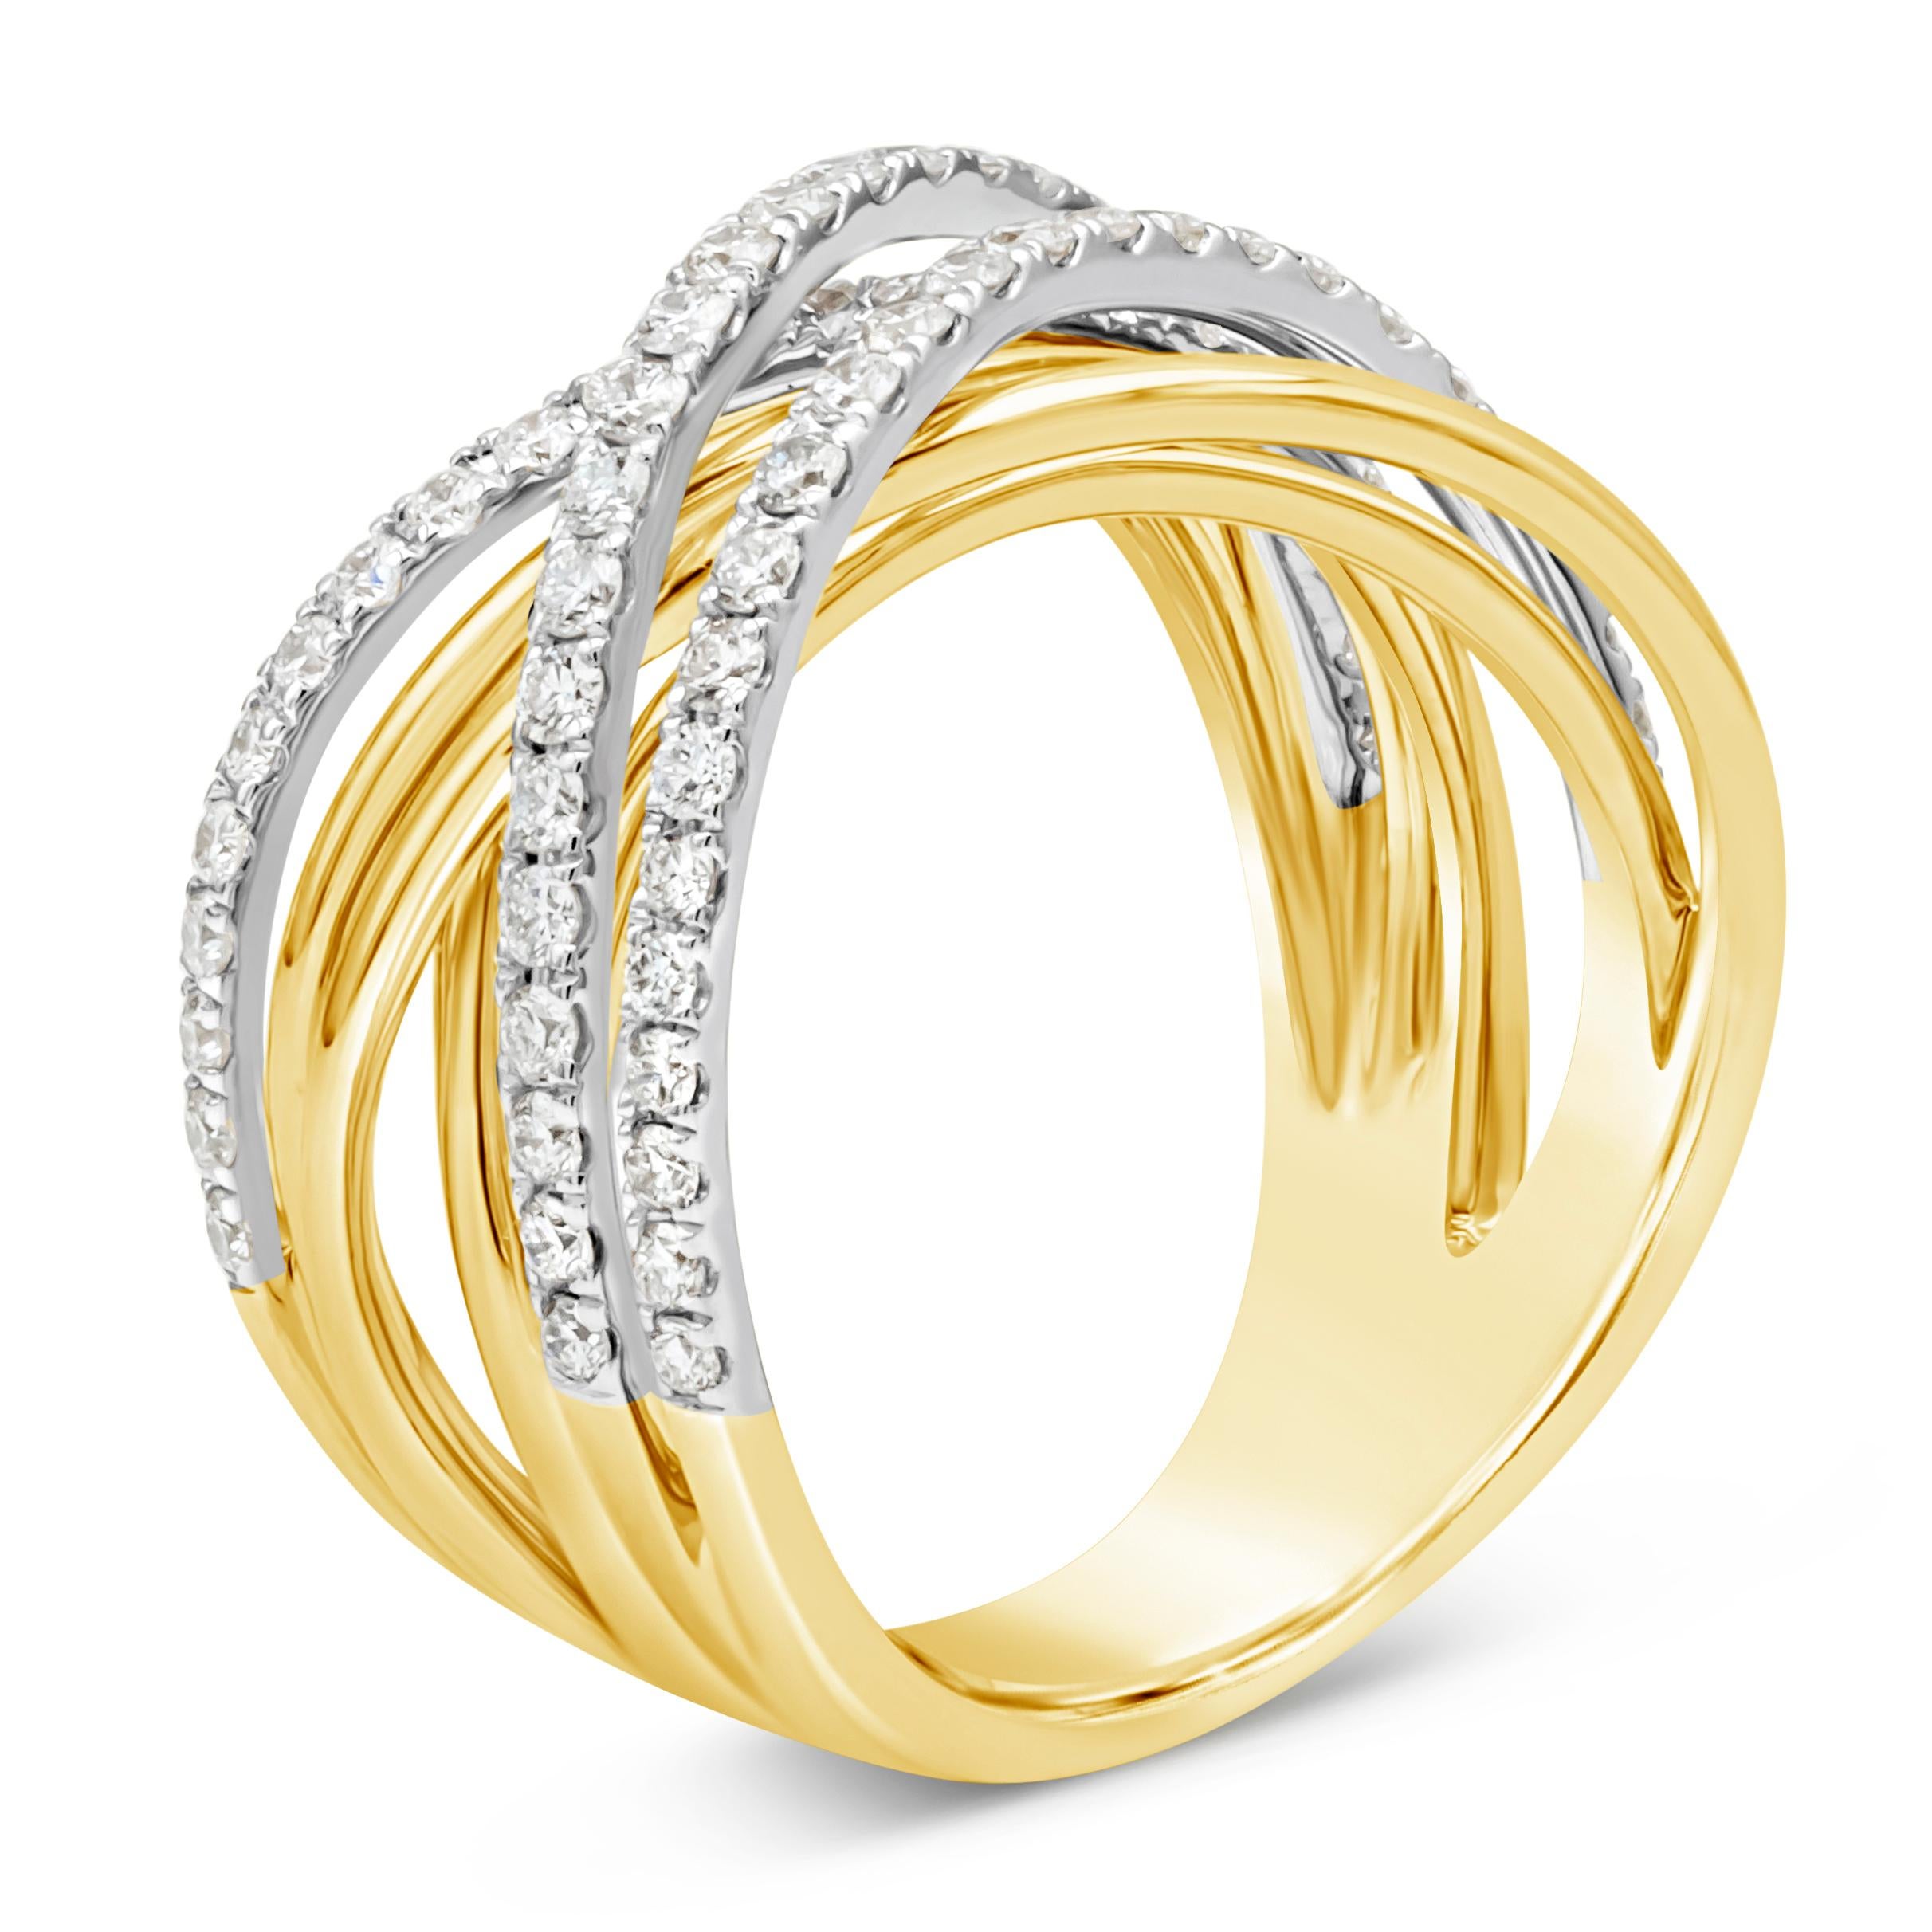 A appealing fashion ring showcasing a six row entwined galaxy ring. Embellished with brilliant round diamonds weighing 0.84 carats total, F-G color and VS-Si in clarity. Made in 18K White and Yellow Gold, Size 6.5 US 

Style available in different